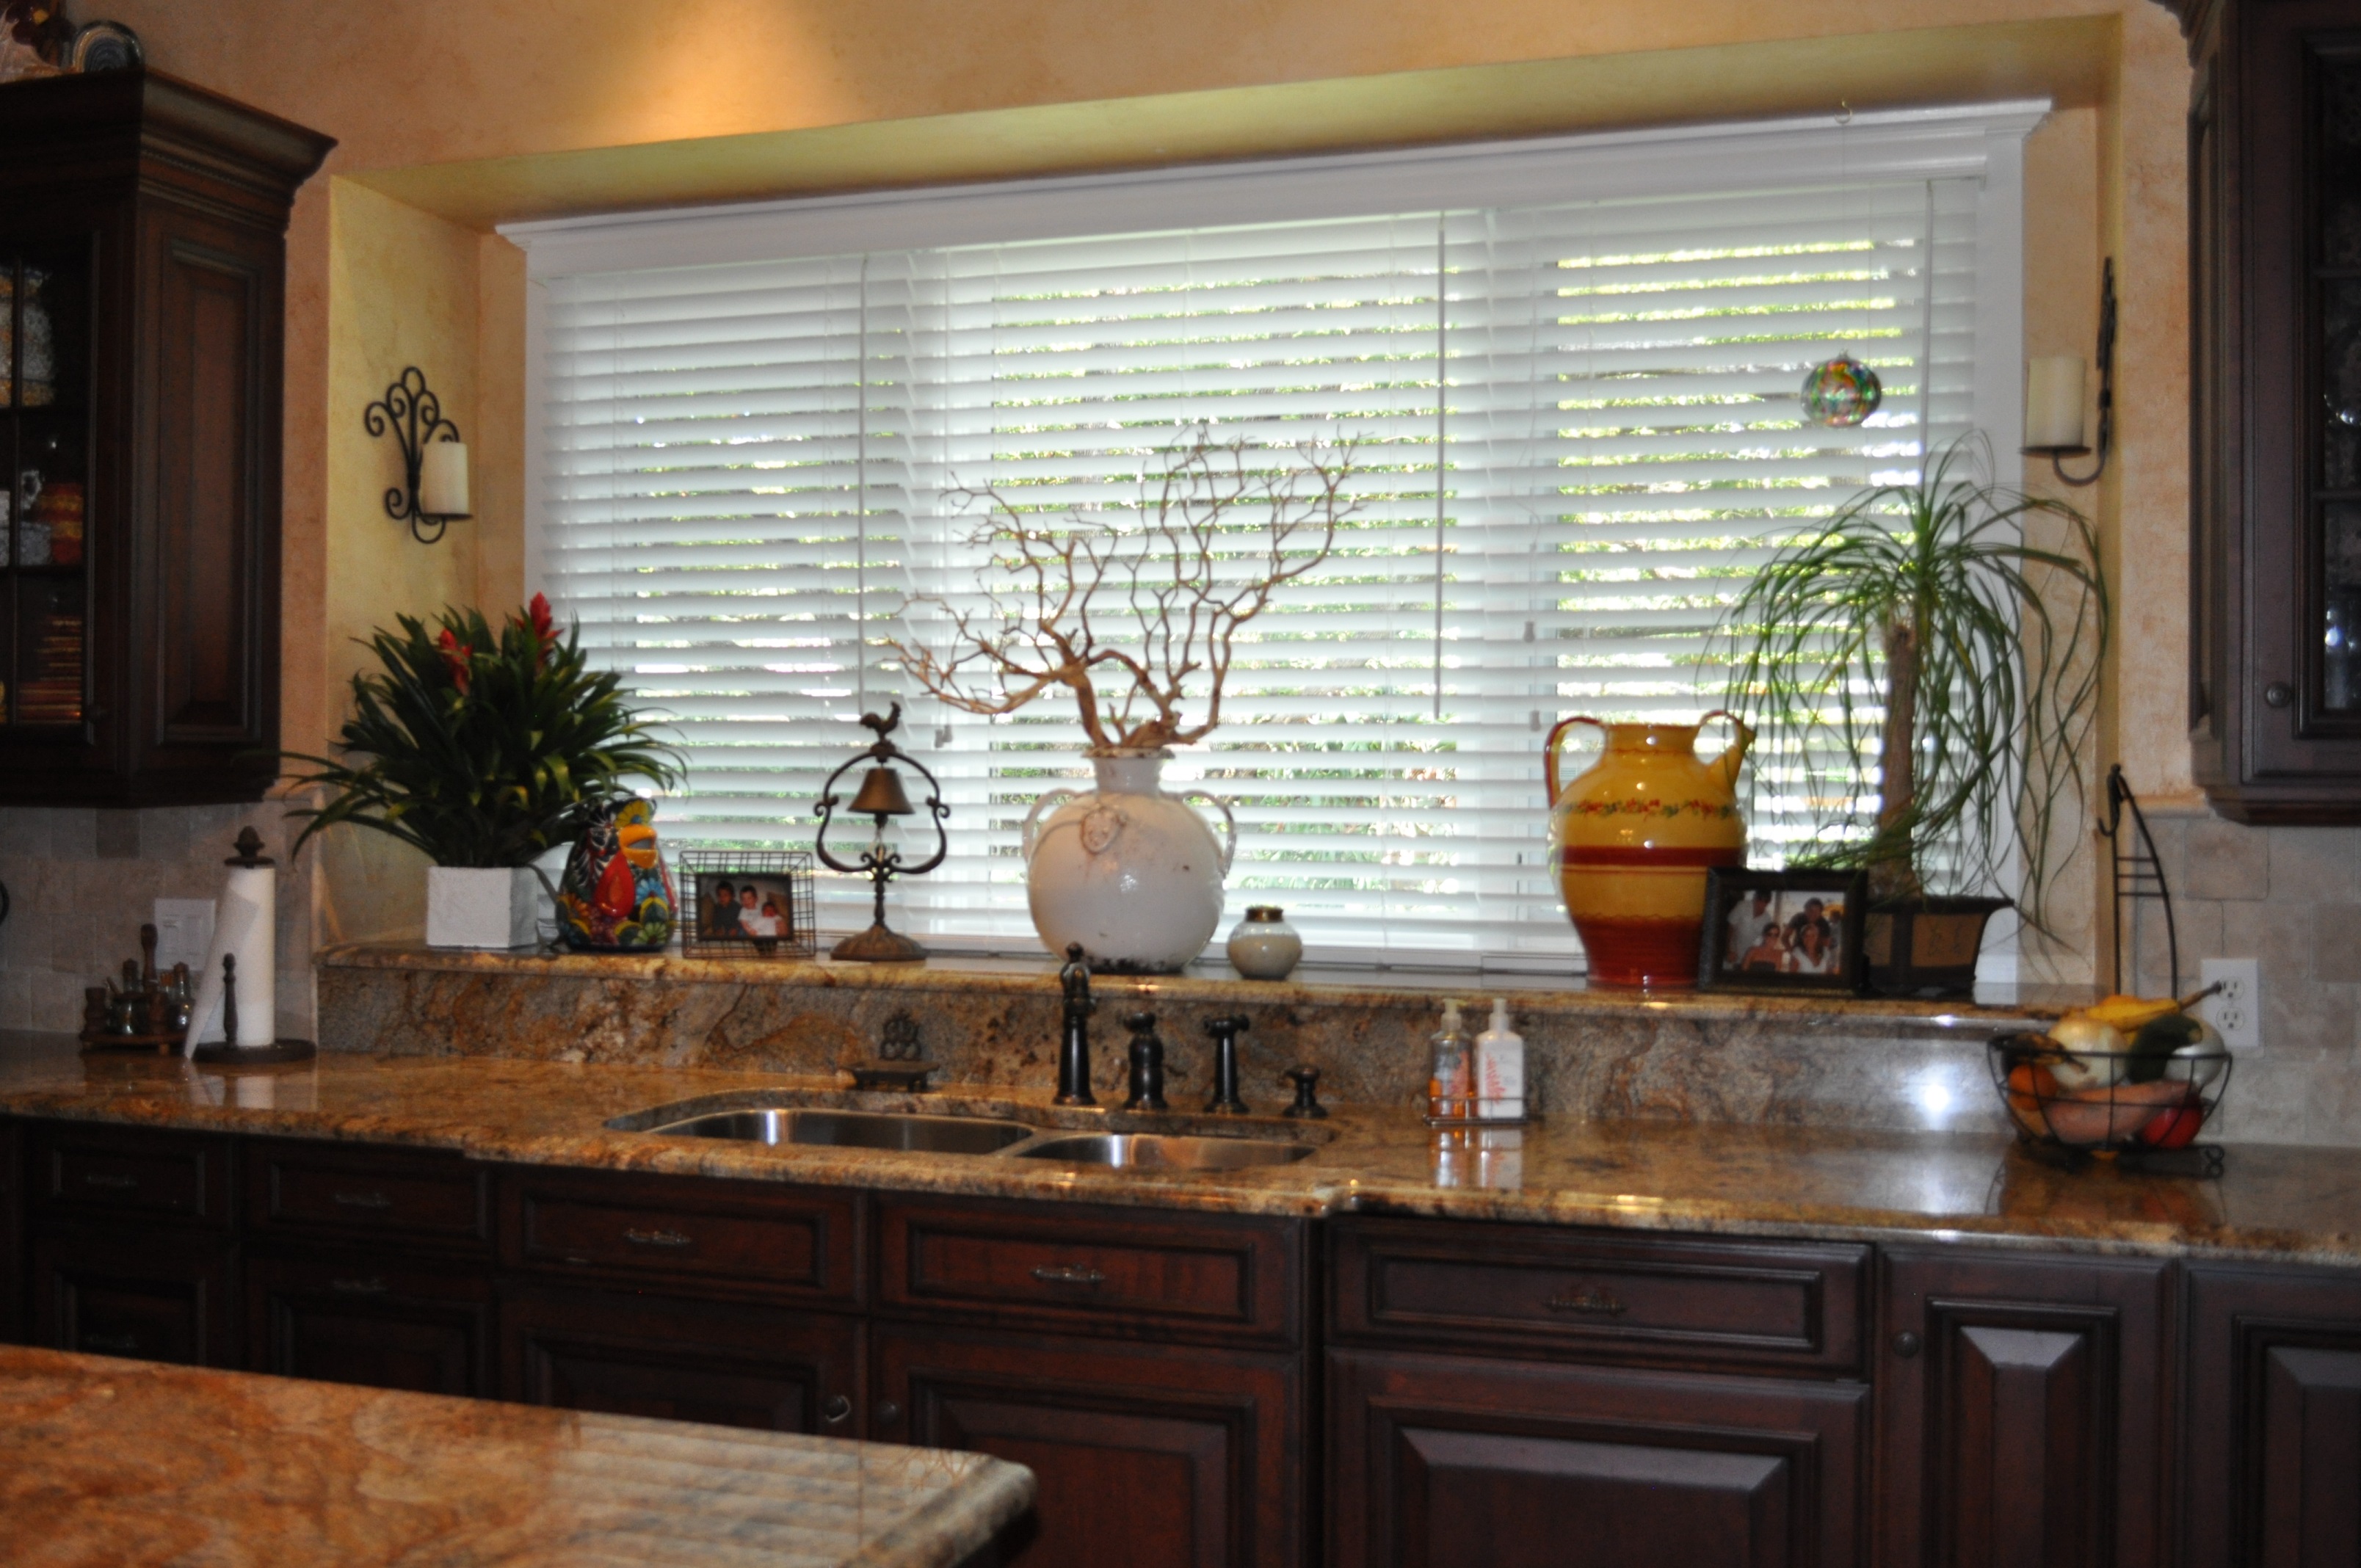 plantation shutters Lake Mary, window blinds, roller shades